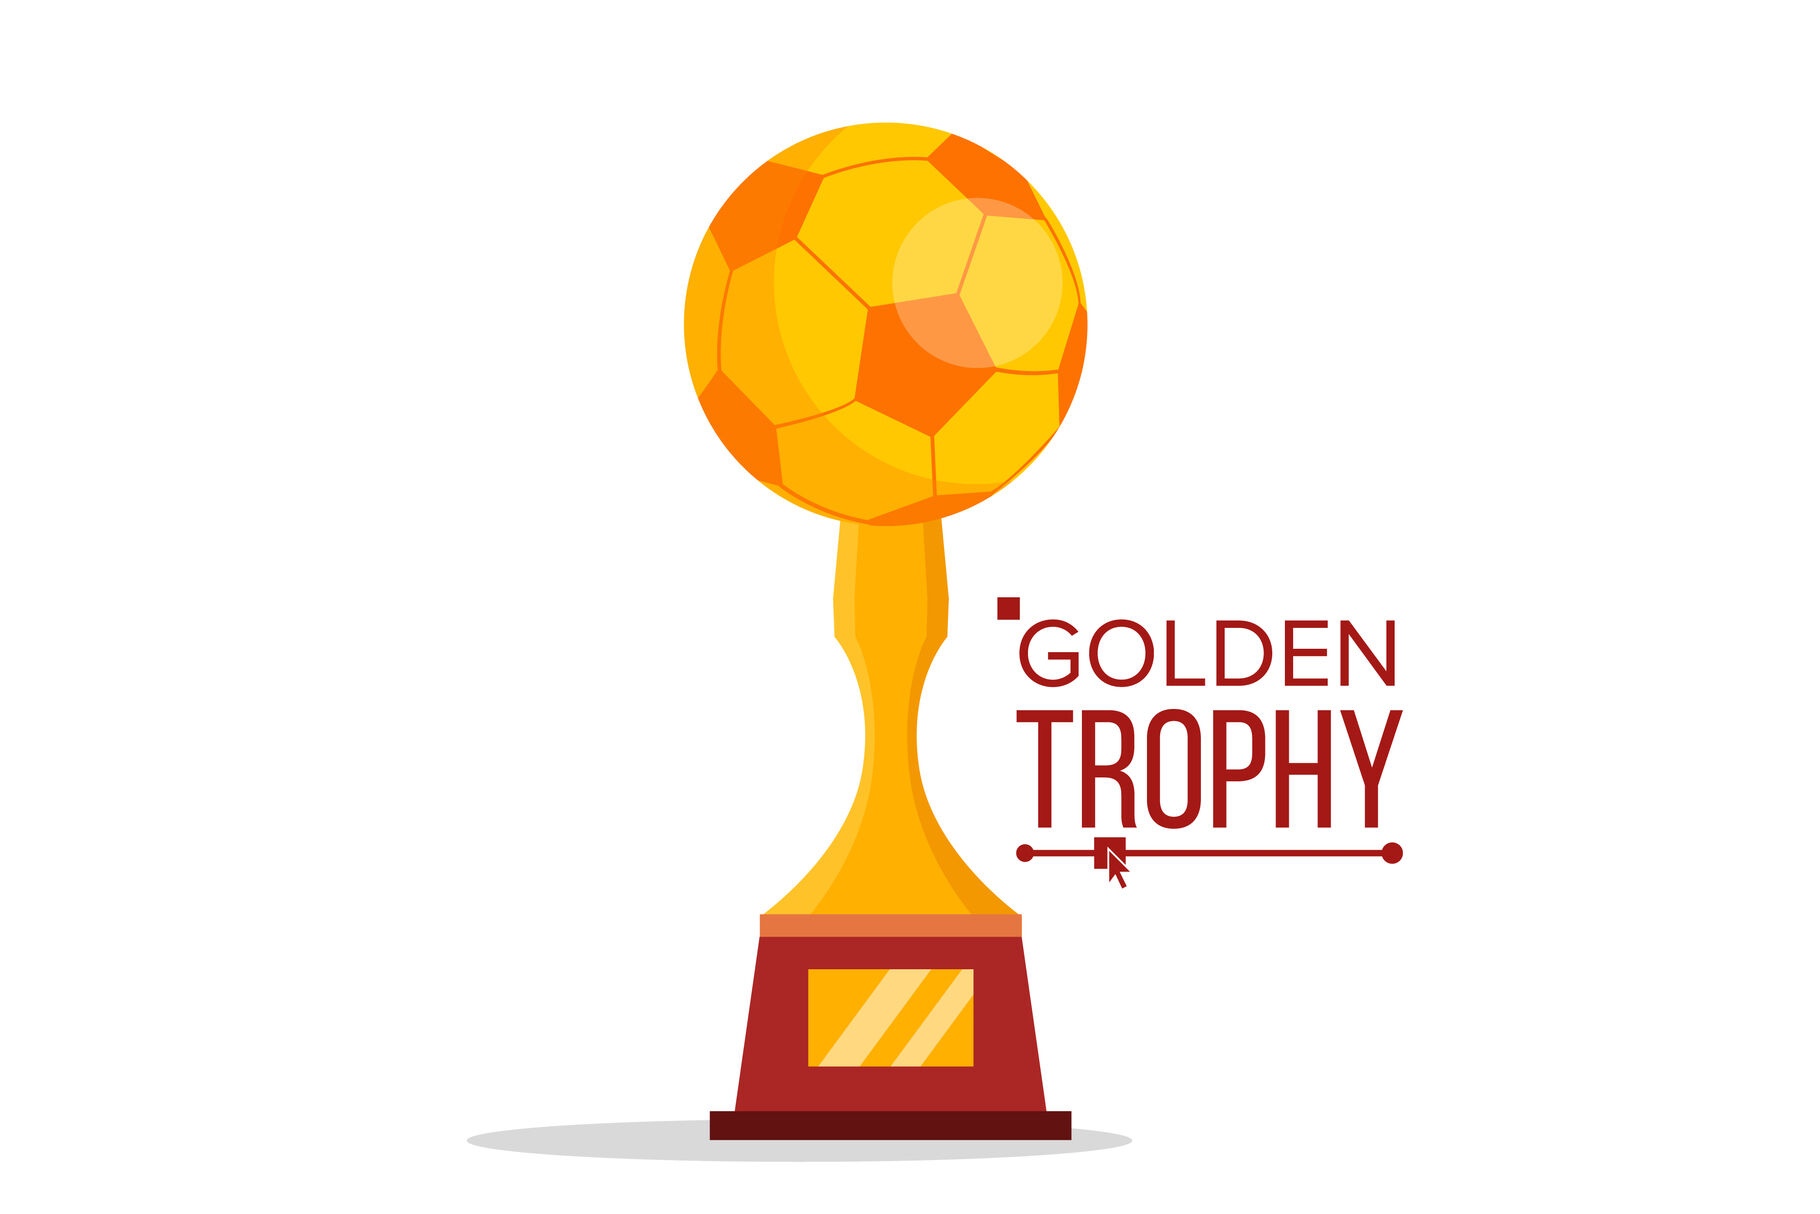 SOCCER: FIFA World Cup trophy infographic